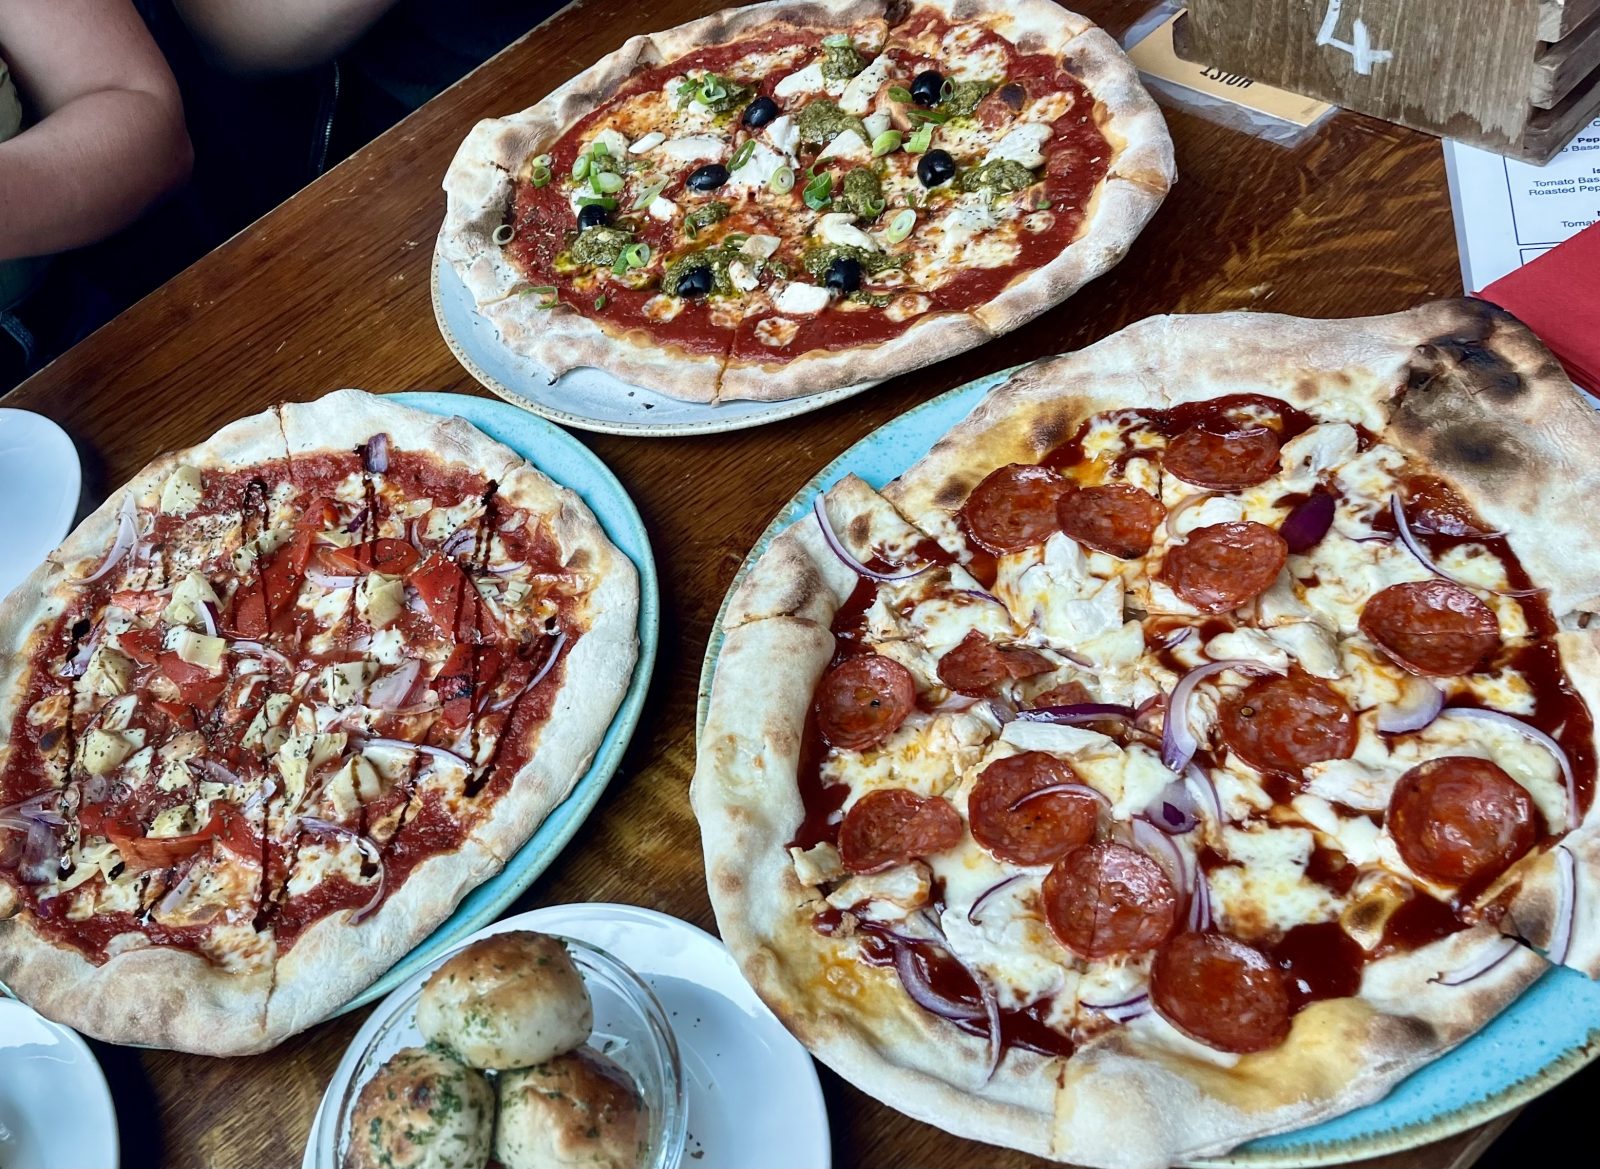 pizzas and dough balls on table.